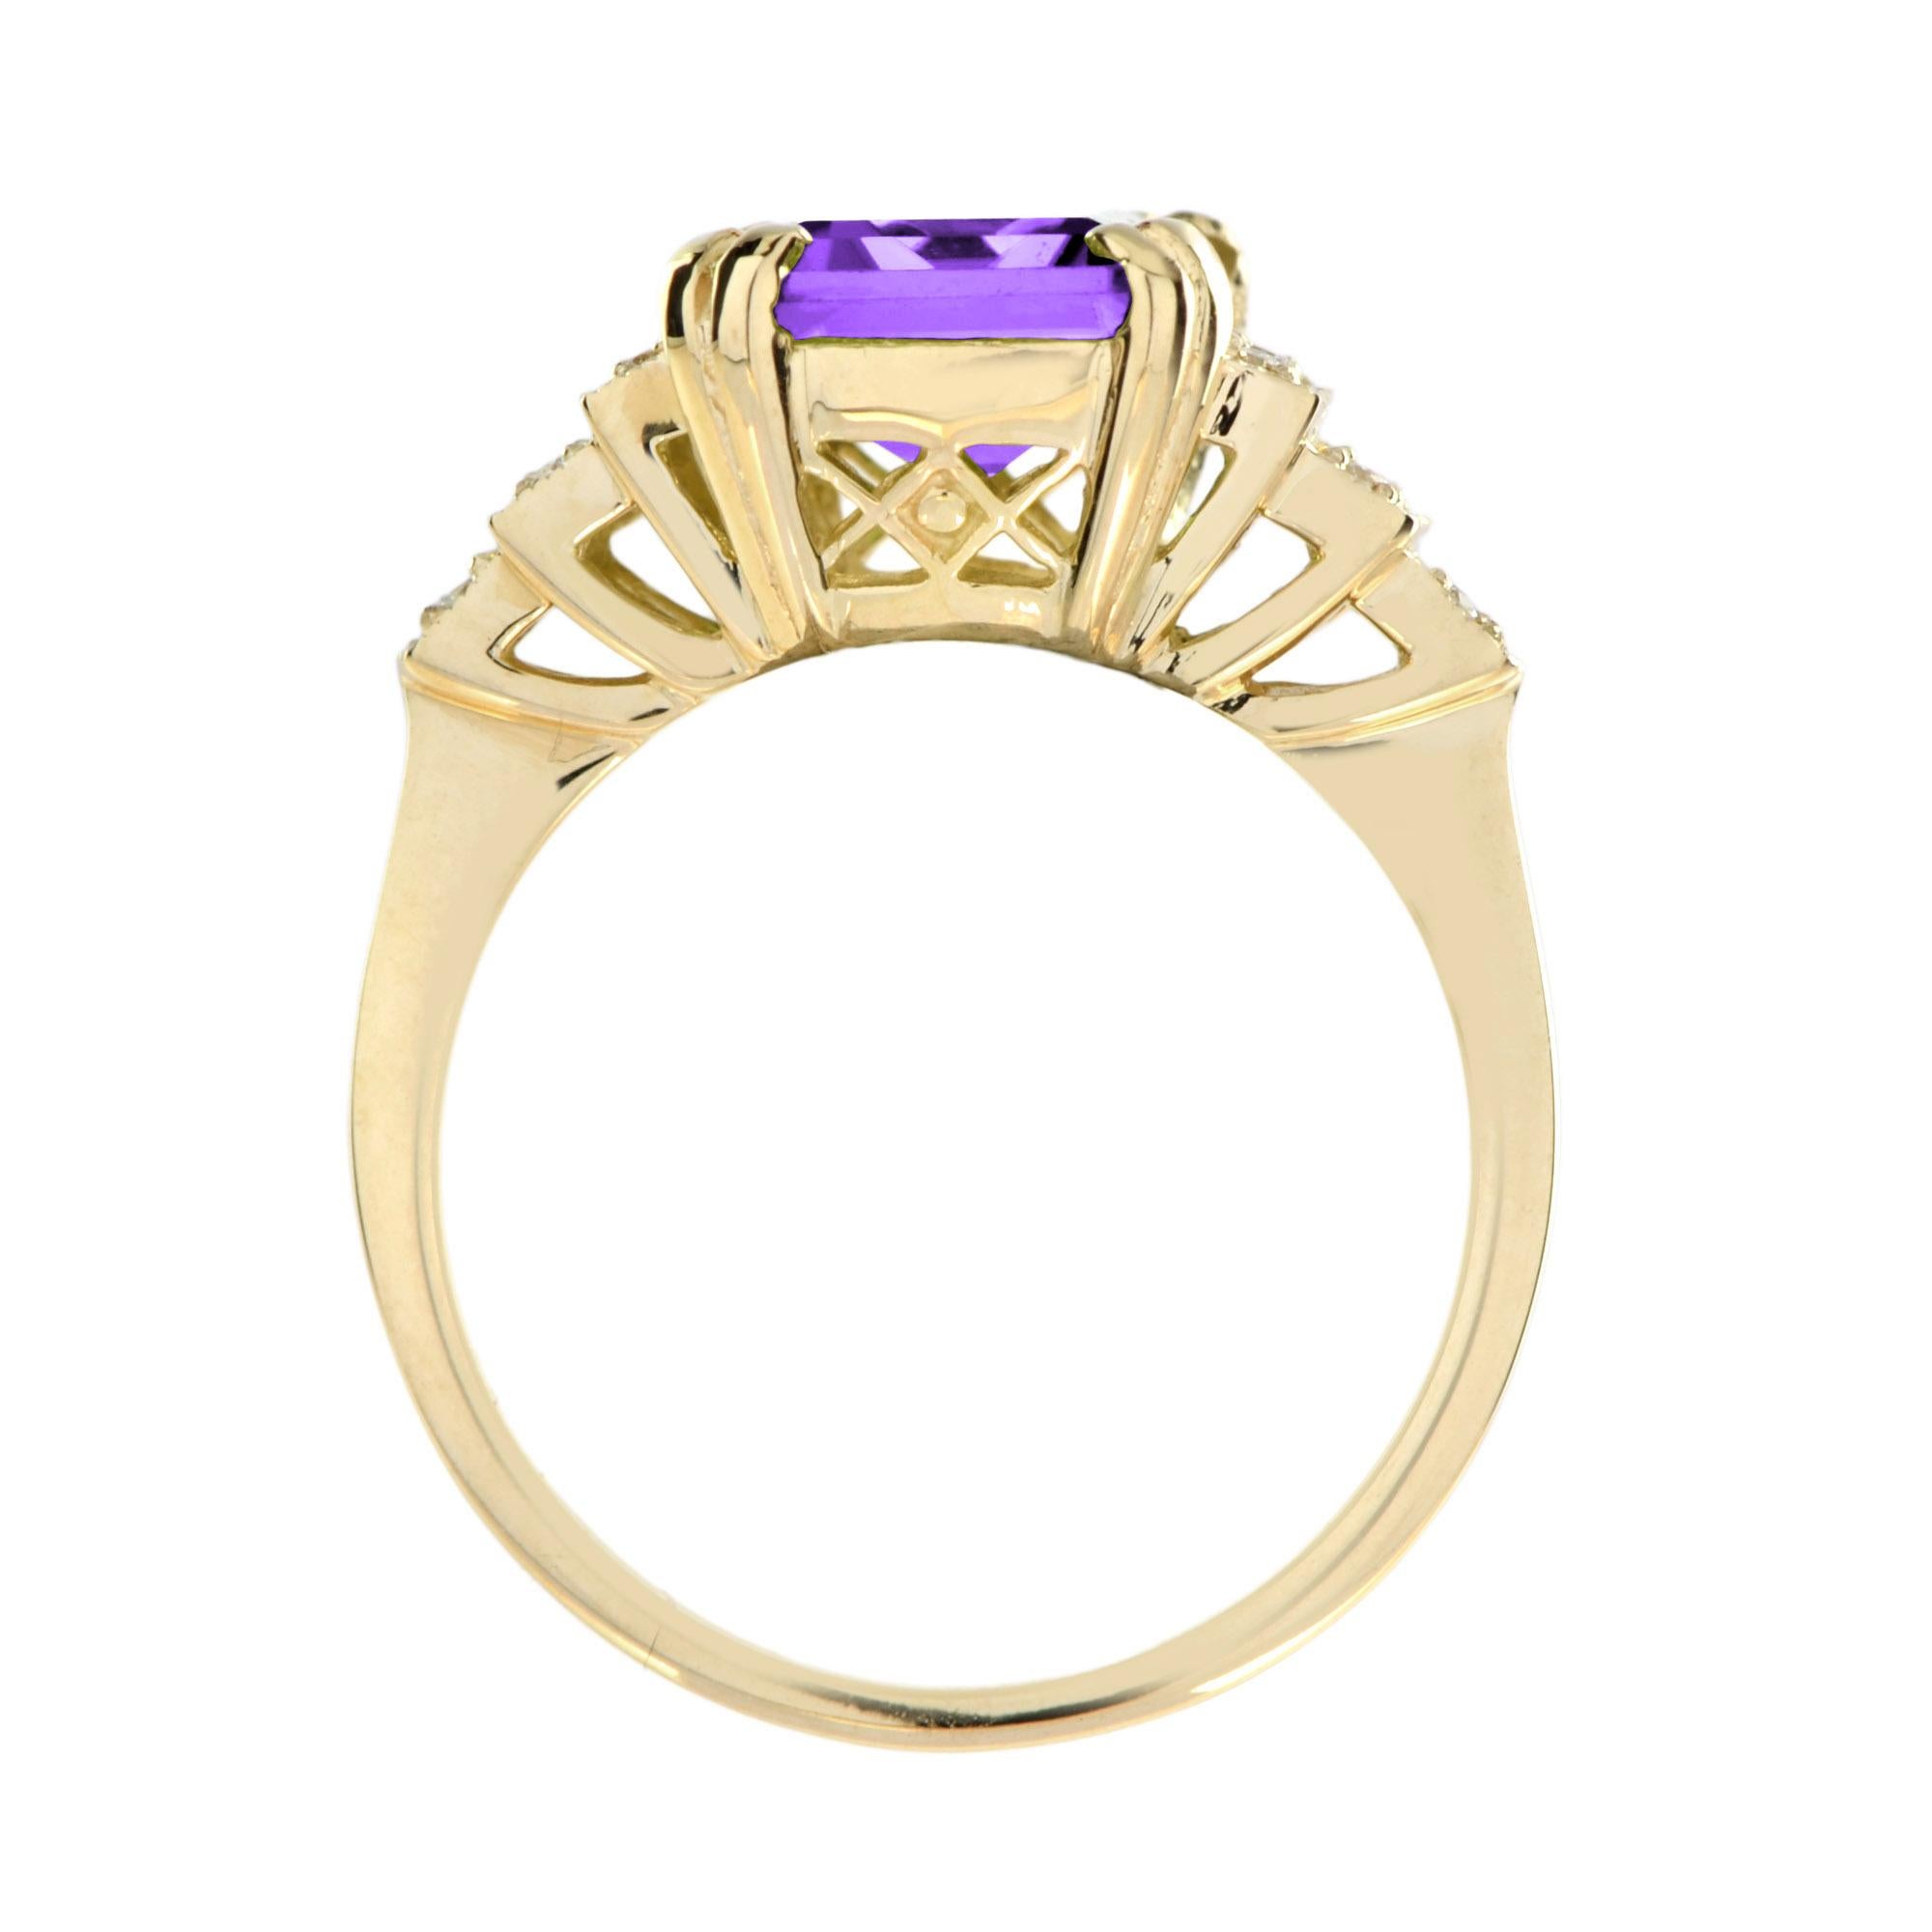 For Sale:  Emerald Cut Amethyst and Diamond Step Shoulder Engagement Ring in 14K Gold 6